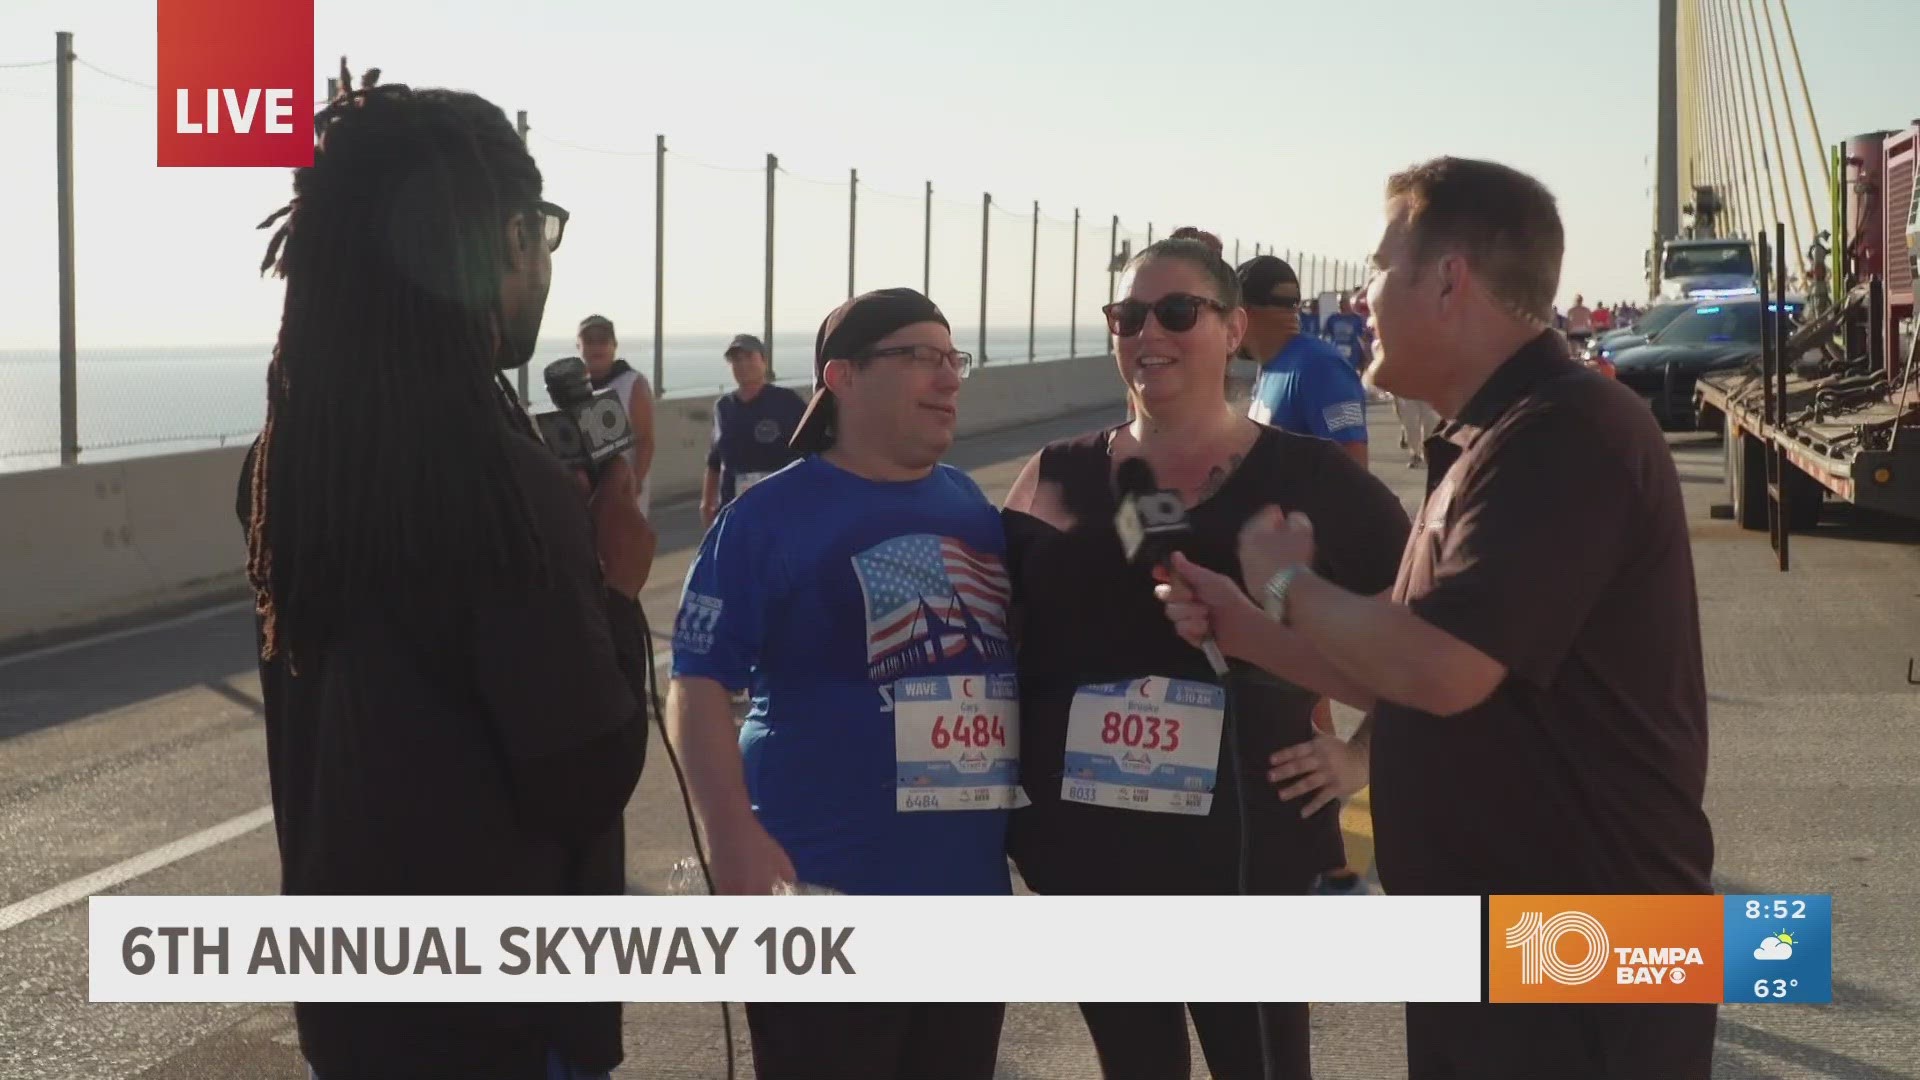 It's a special moment for Skyway 10K participants to reach the midspan of the bridge.